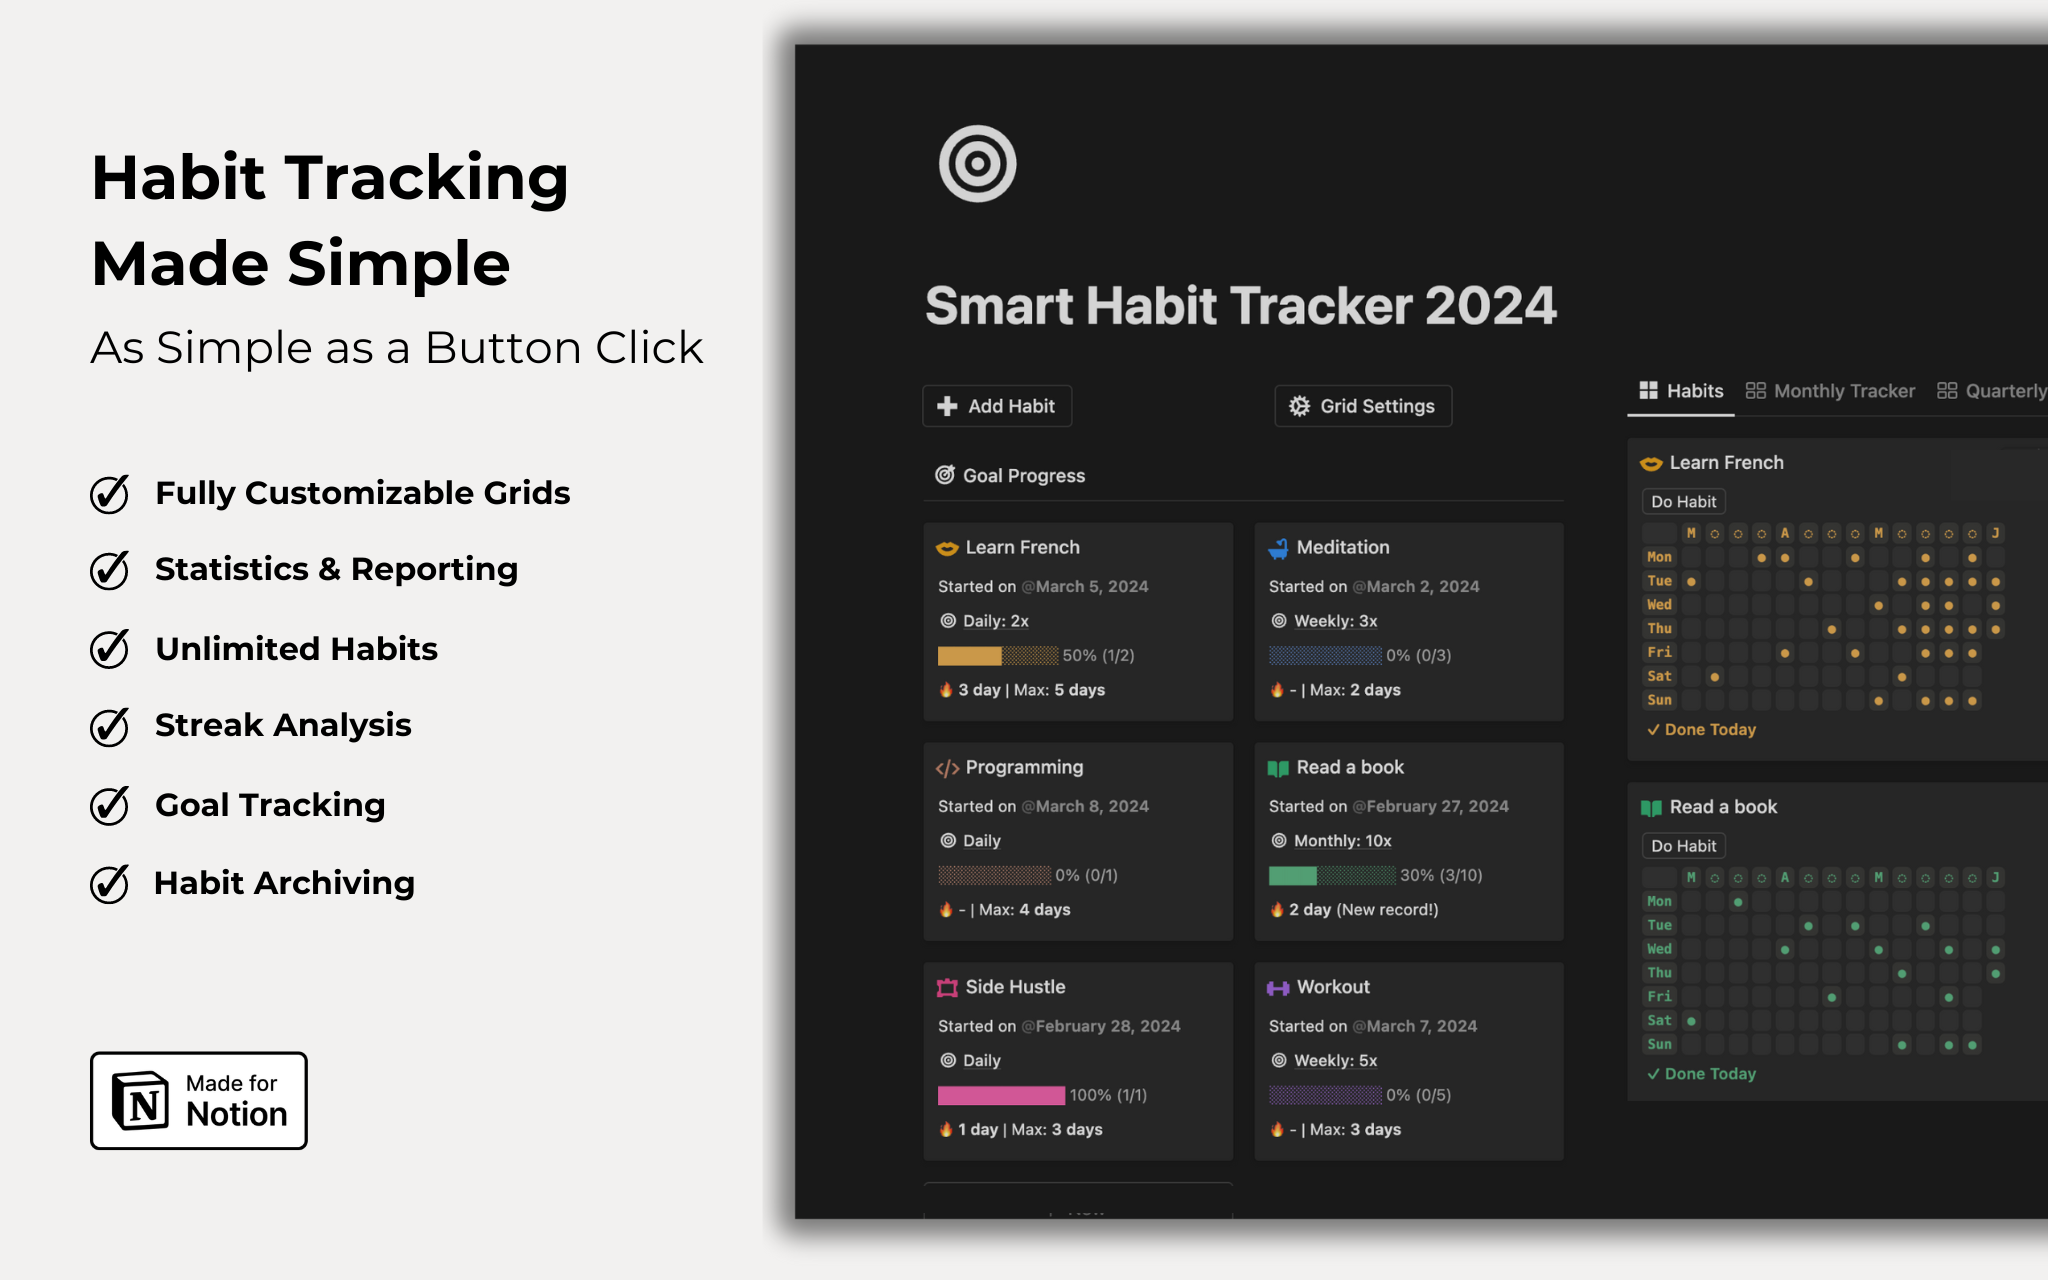 Build better habits with the Ultimate Smart Habit Tracker! One-click logging makes it easy to track daily routines. Customizable grids, motivating streak counts, goal progress updates help you visualize progress and stay on track. Ready to build life-changing habits? Start now! 